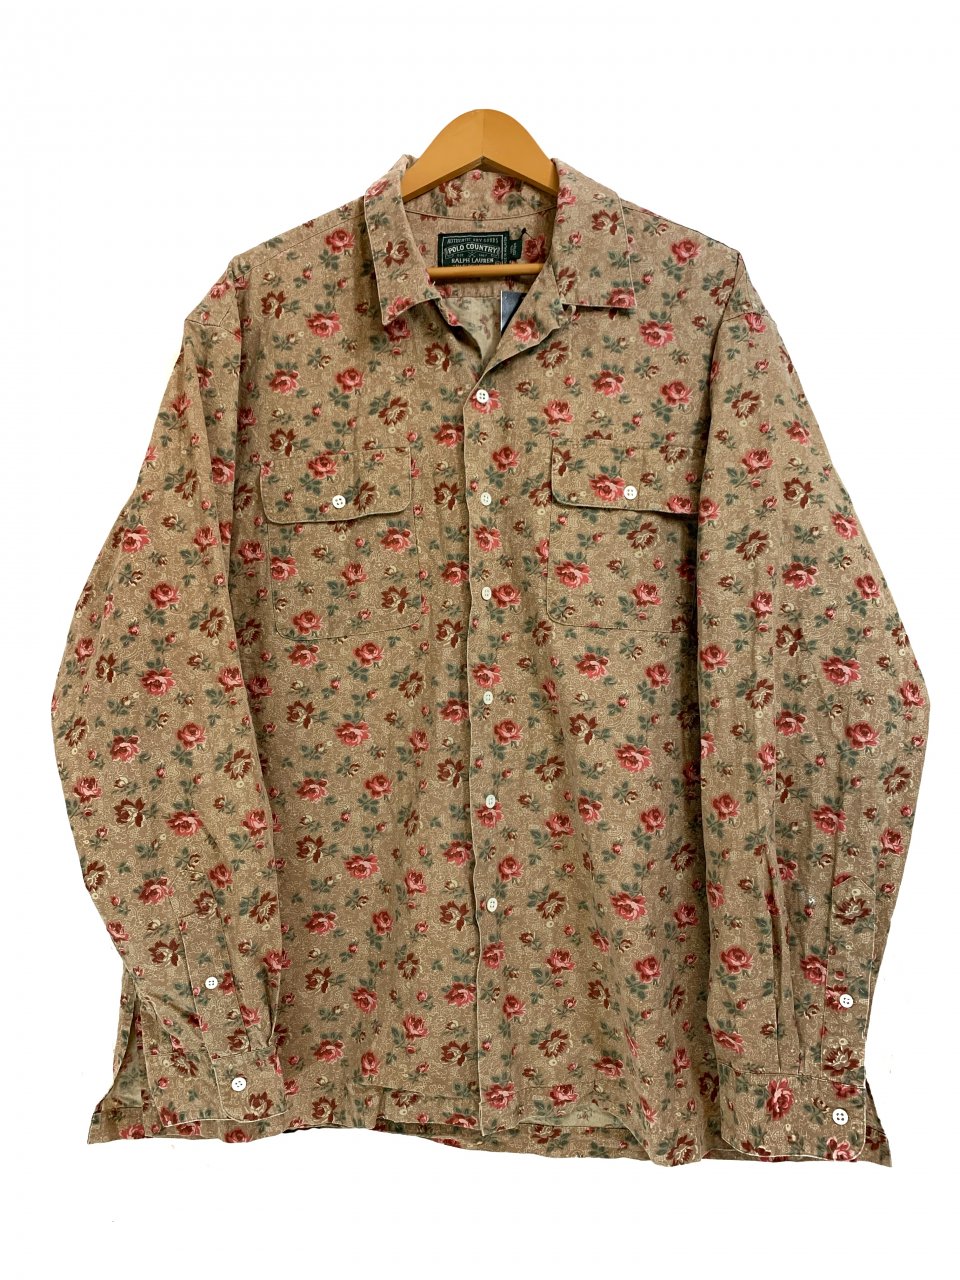 90s POLO COUNTRY Flower Pattern Open Collar L/S Shirt ベージュ XL 